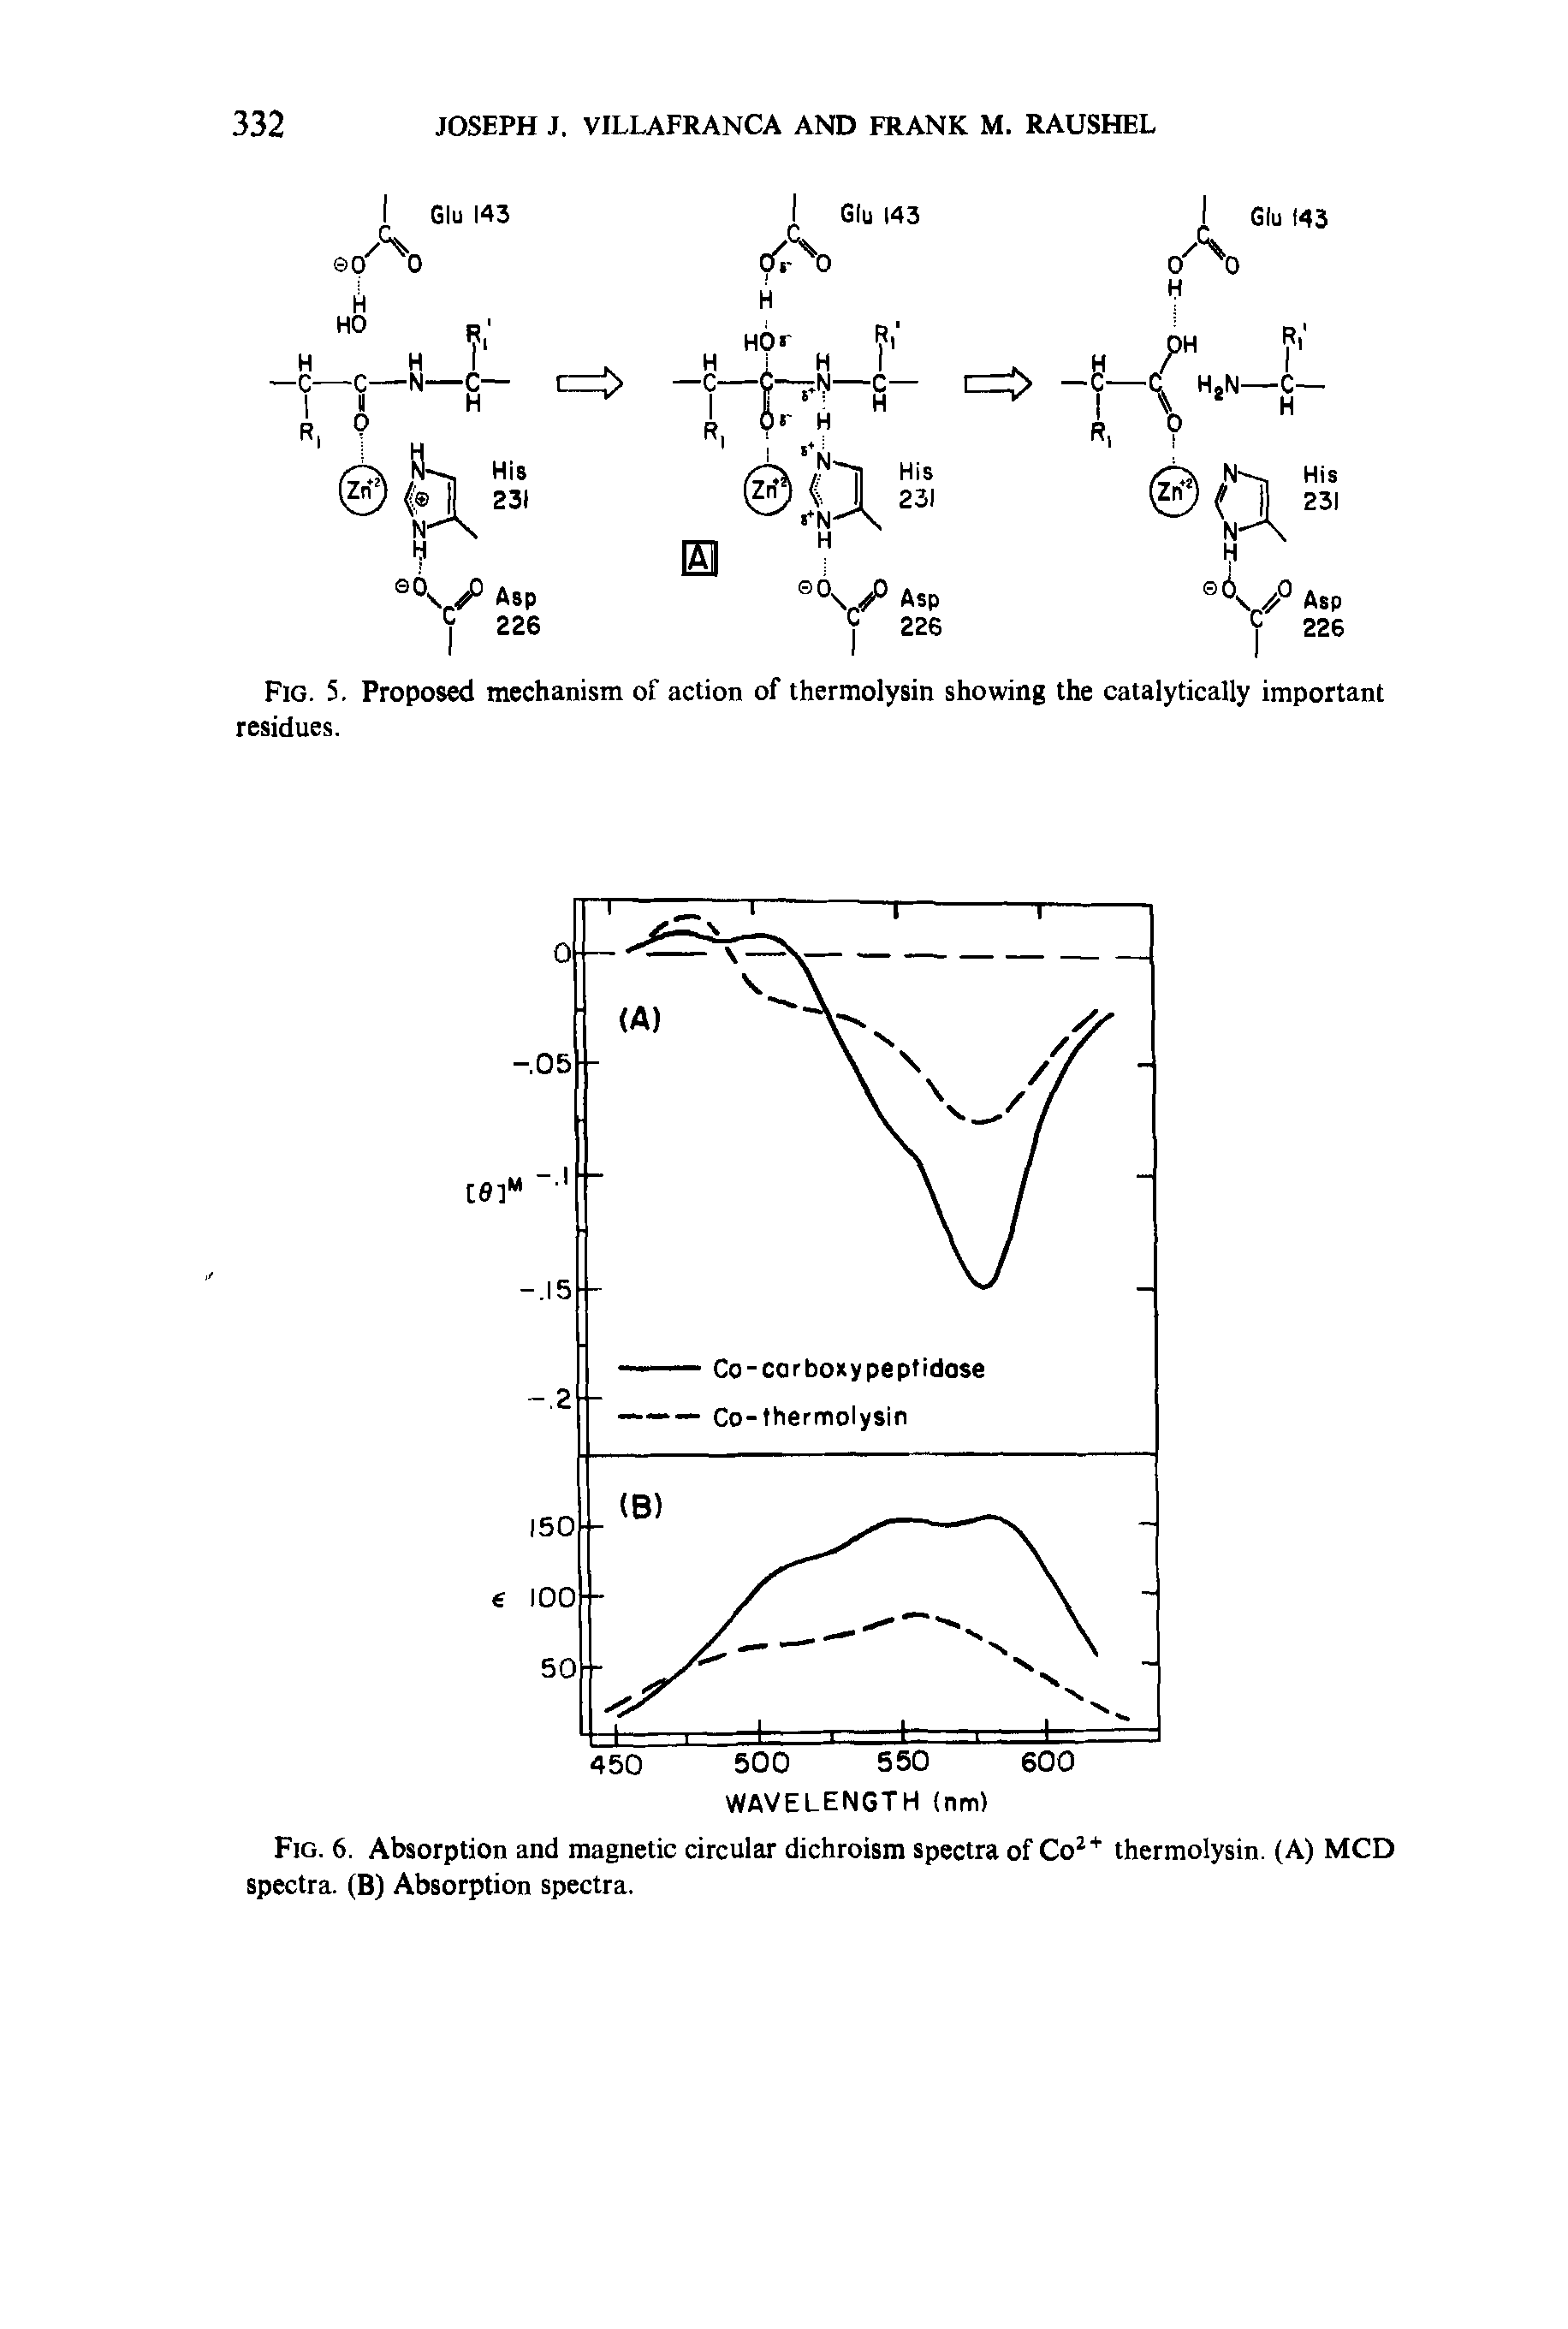 Fig. 6. Absorption and magnetic circular dichroism spectra of Co2+ thermolysin. (A) MCD spectra. (B) Absorption spectra.